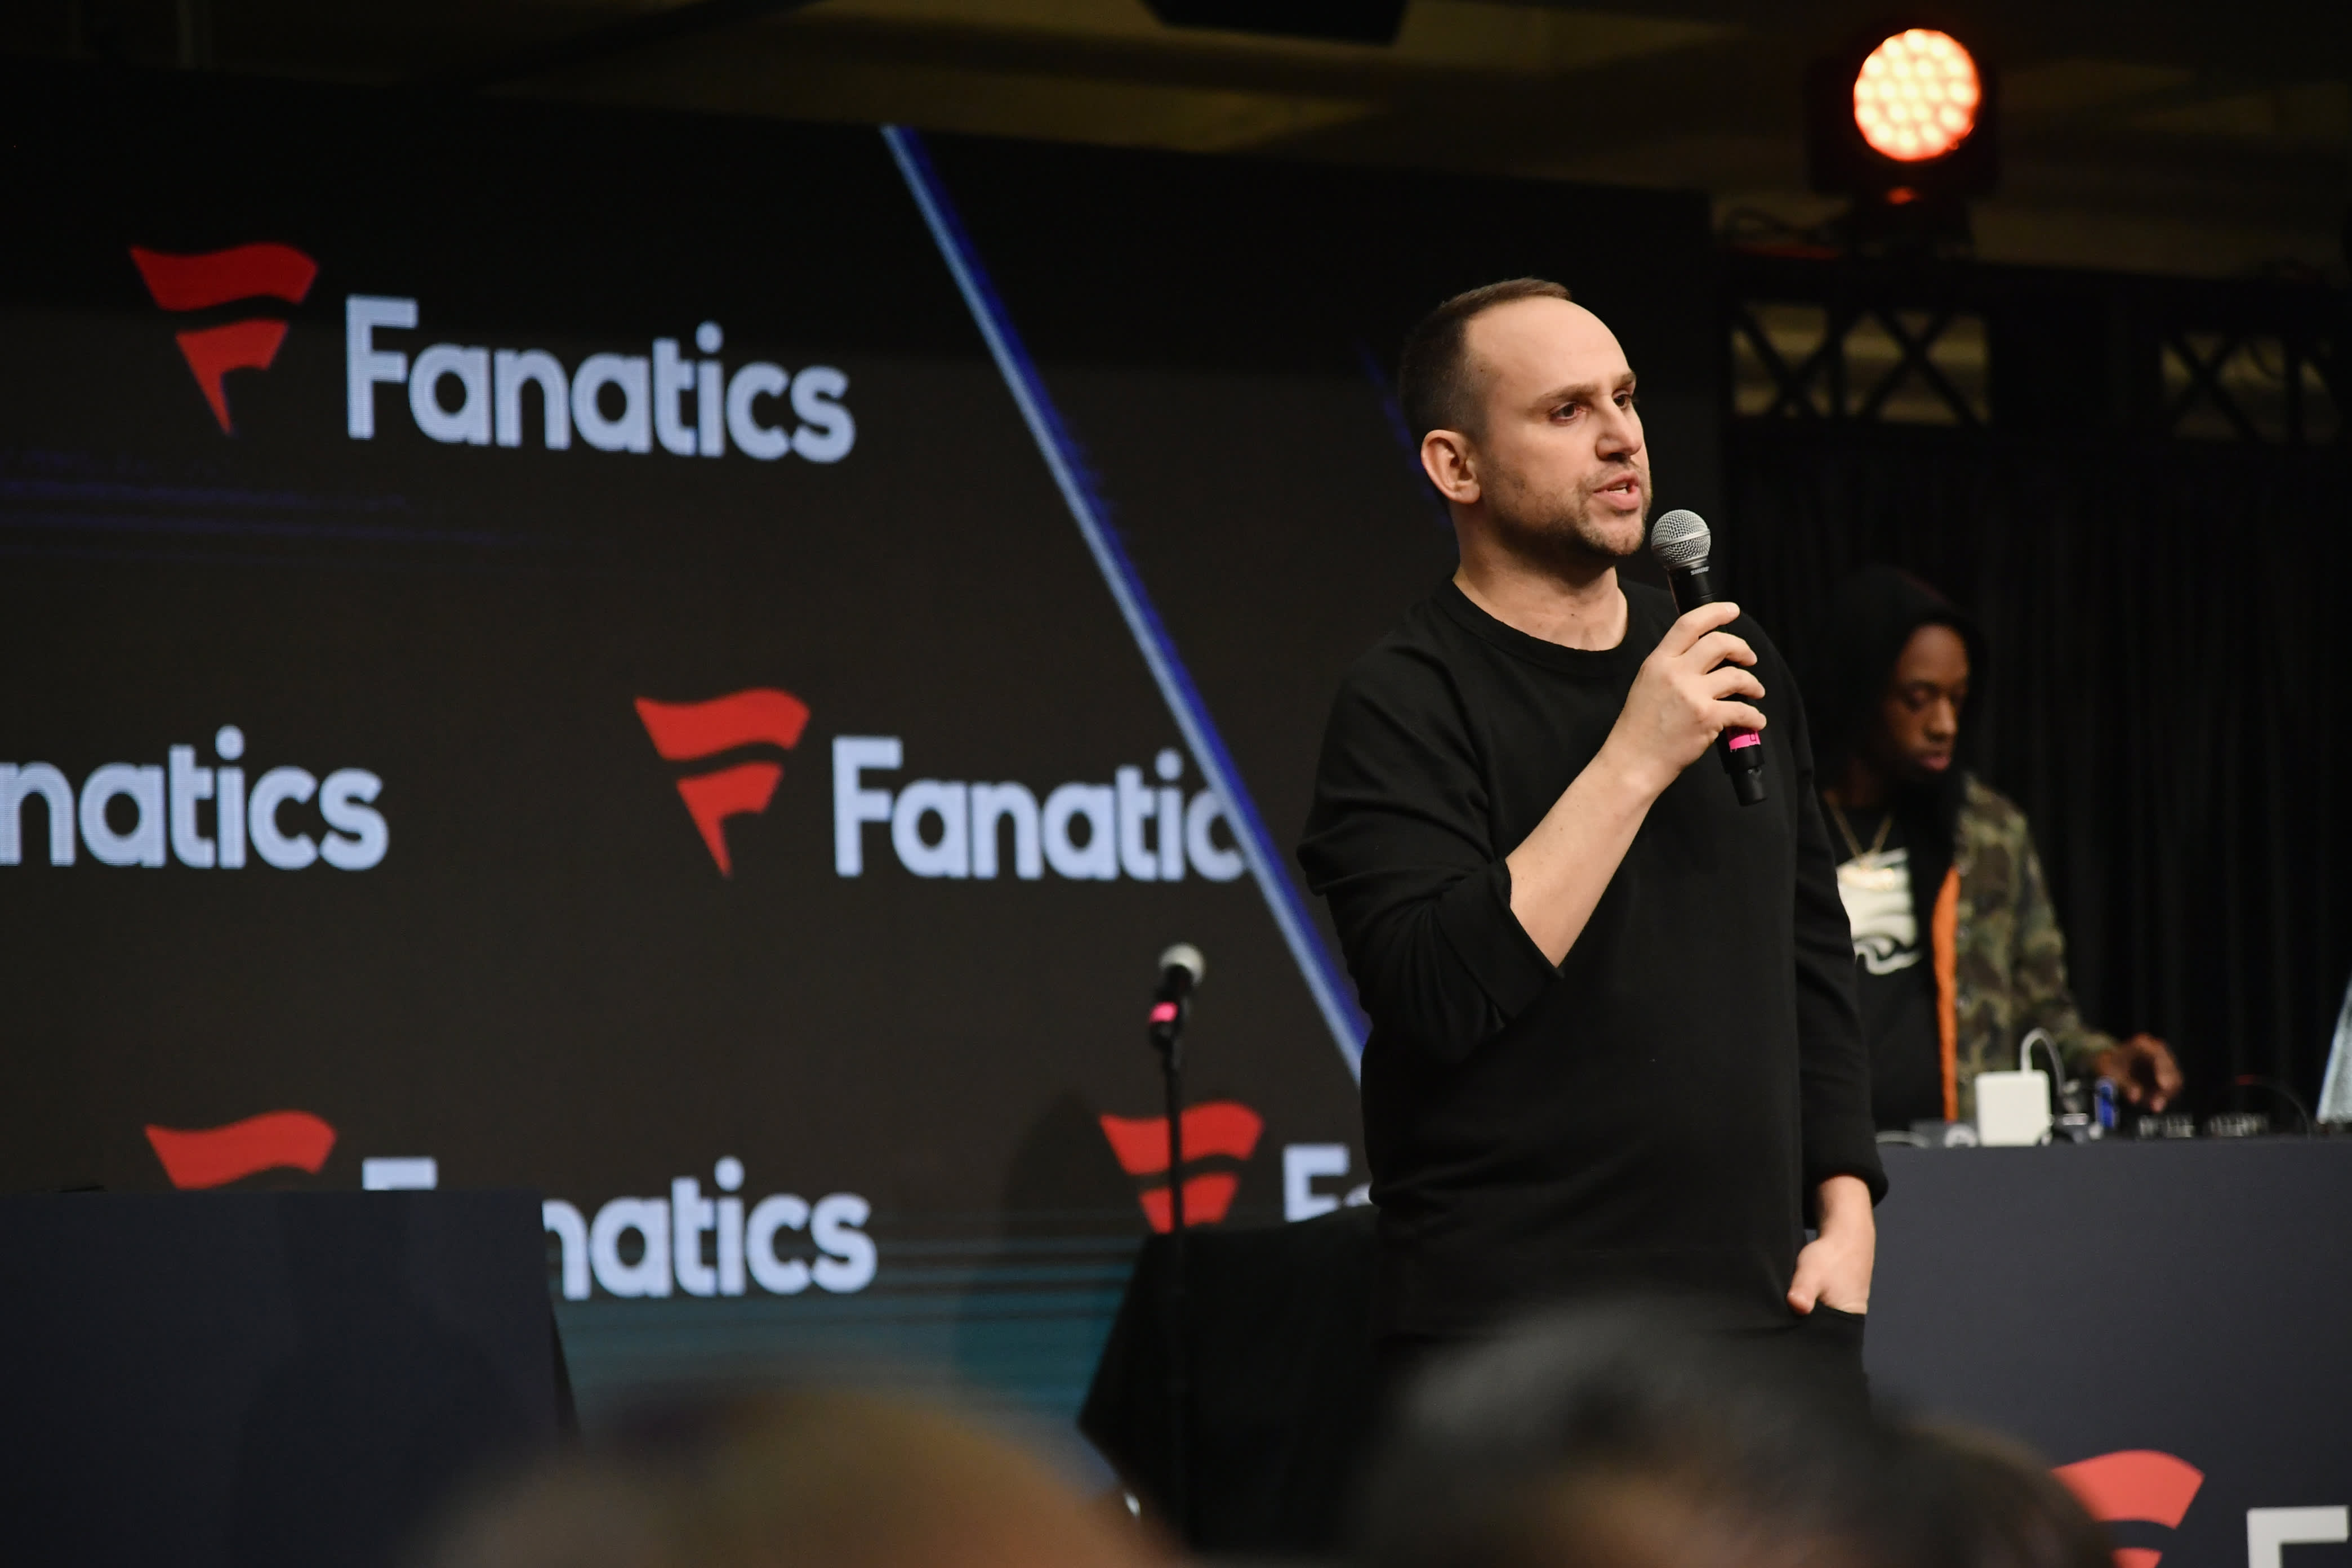 Fanatics valuation doubles to $12.8 billion after a new funding round